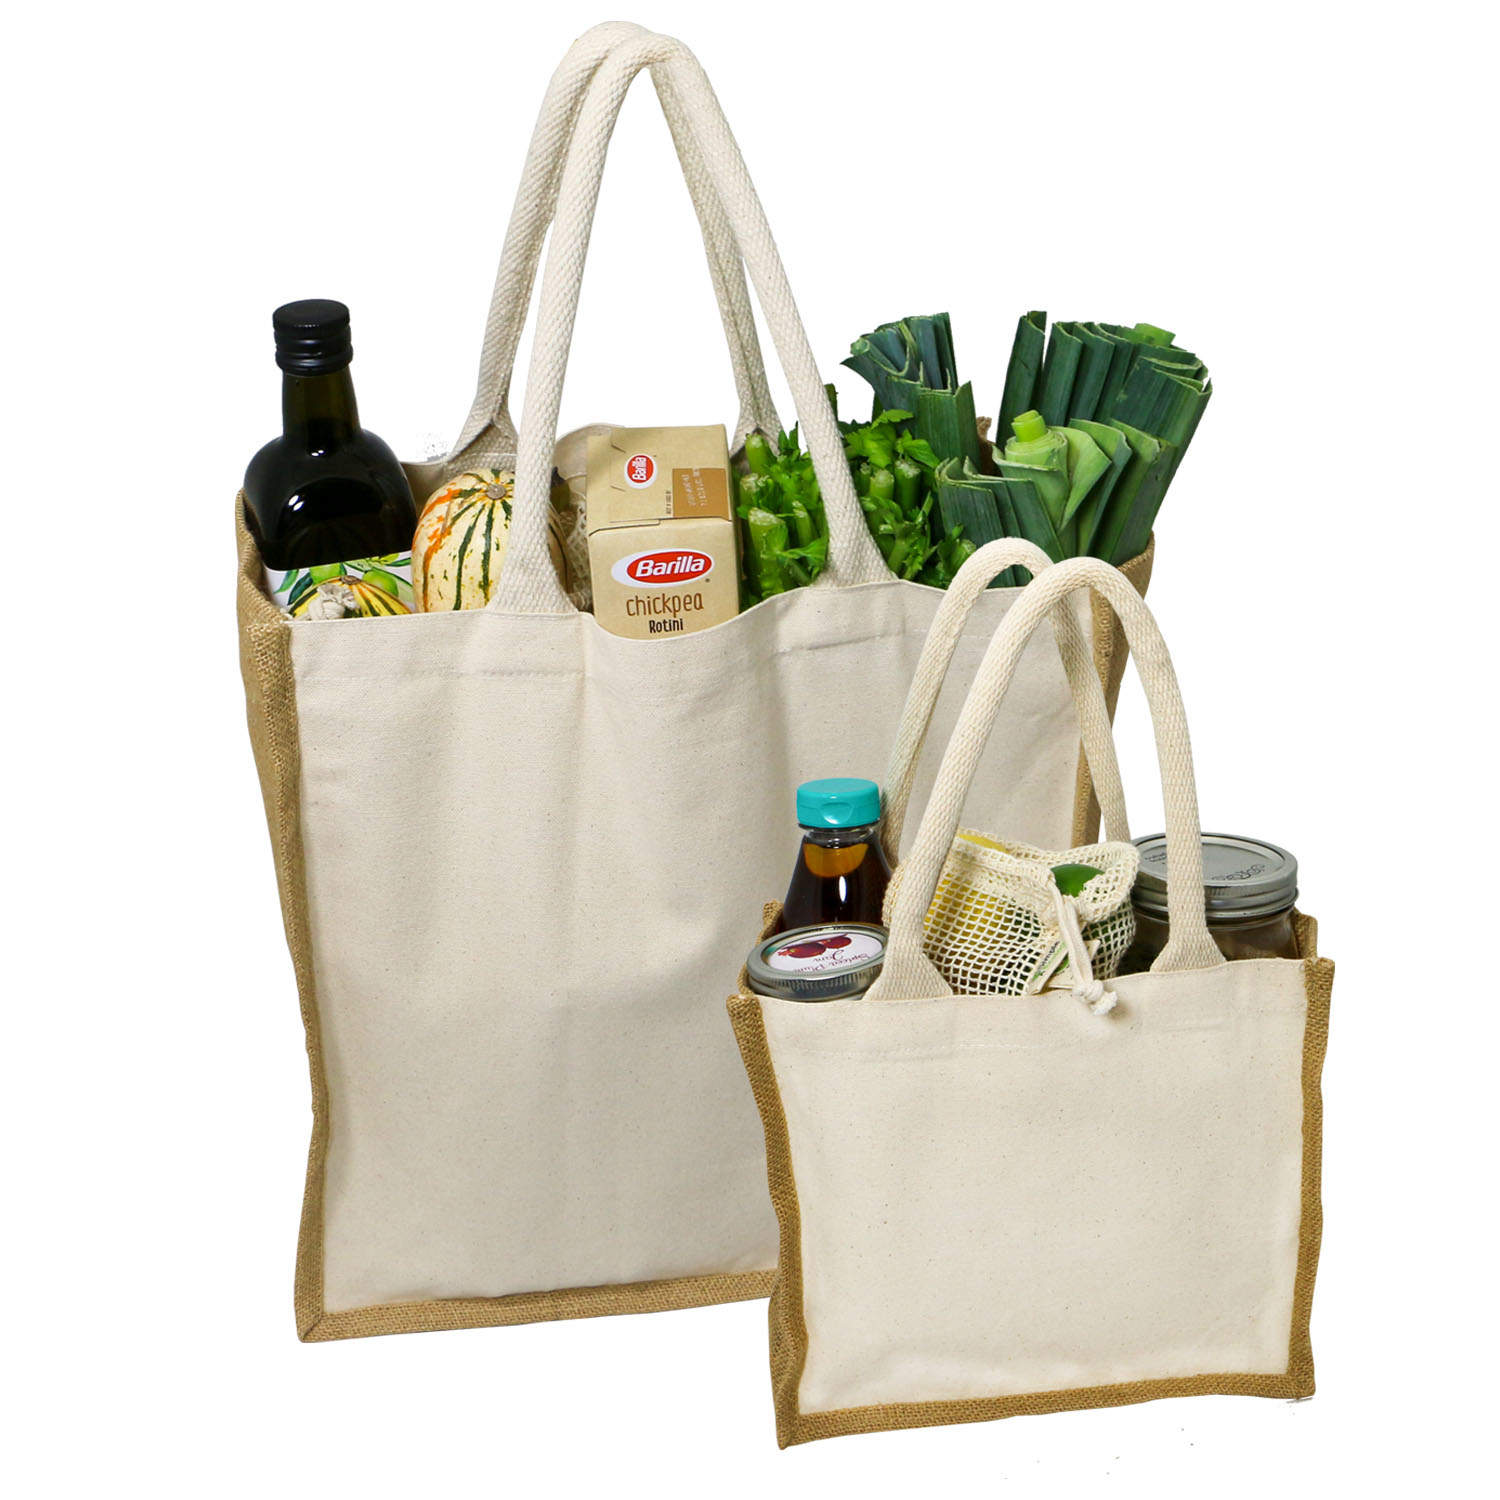 NEW TRADER JOE'S QTY 2 REUSABLE CLOTH CANVAS HEAVY DUTY TOTE GROCERY ECO BAGS 